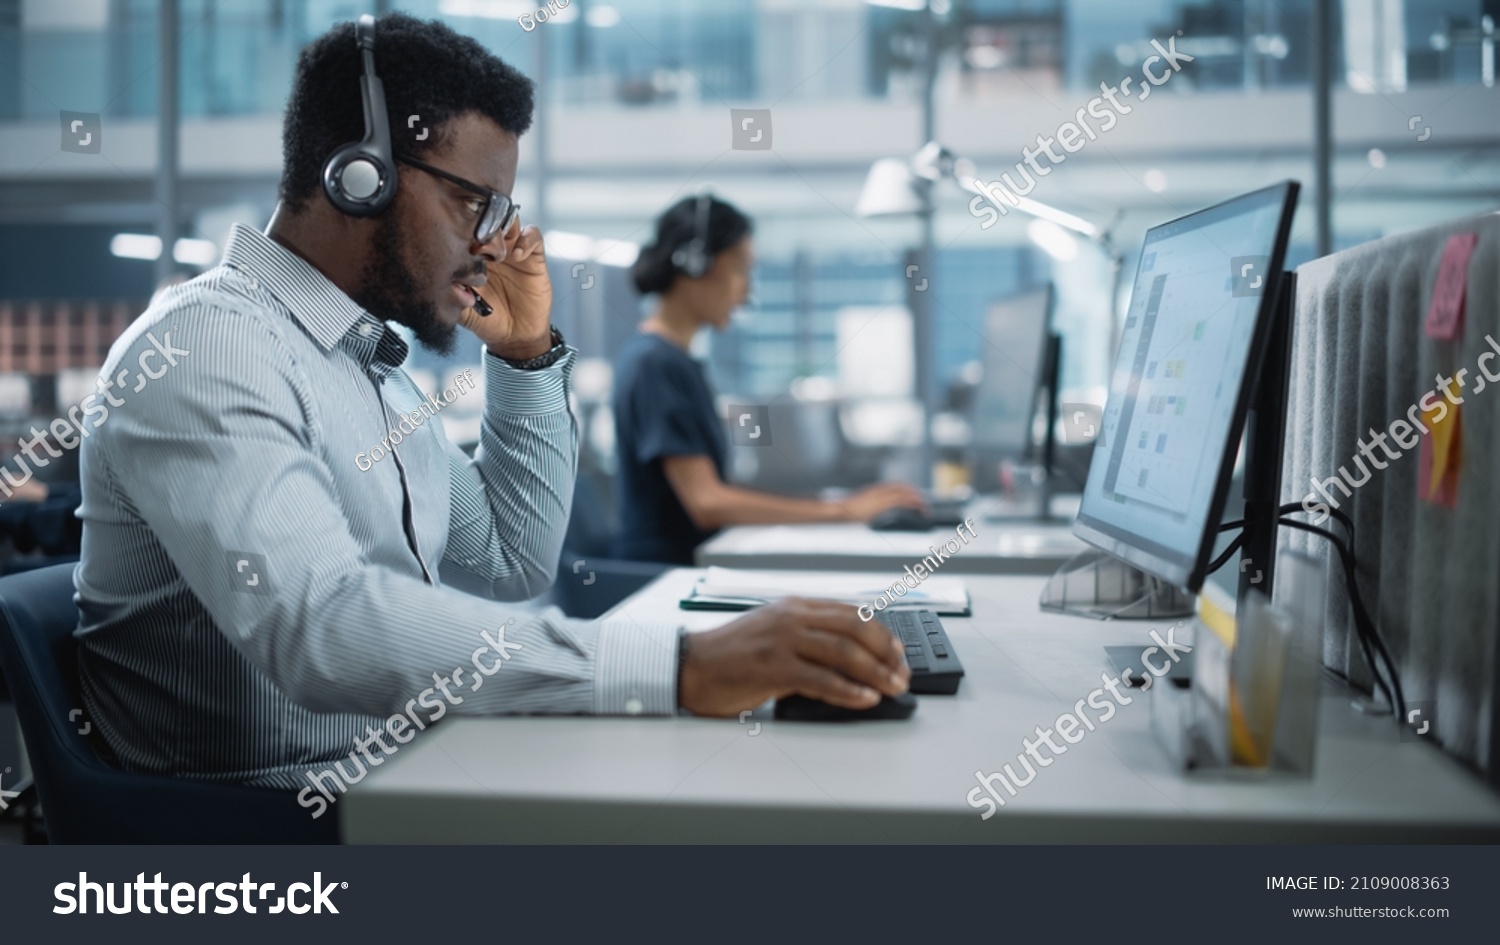 Professional Investment Traders Talking into Headset, Working on Computer with Screen Showing Finance Statistics, Charts Strategy, Stock Market, Telemarketing. Big Office Call Center. #2109008363